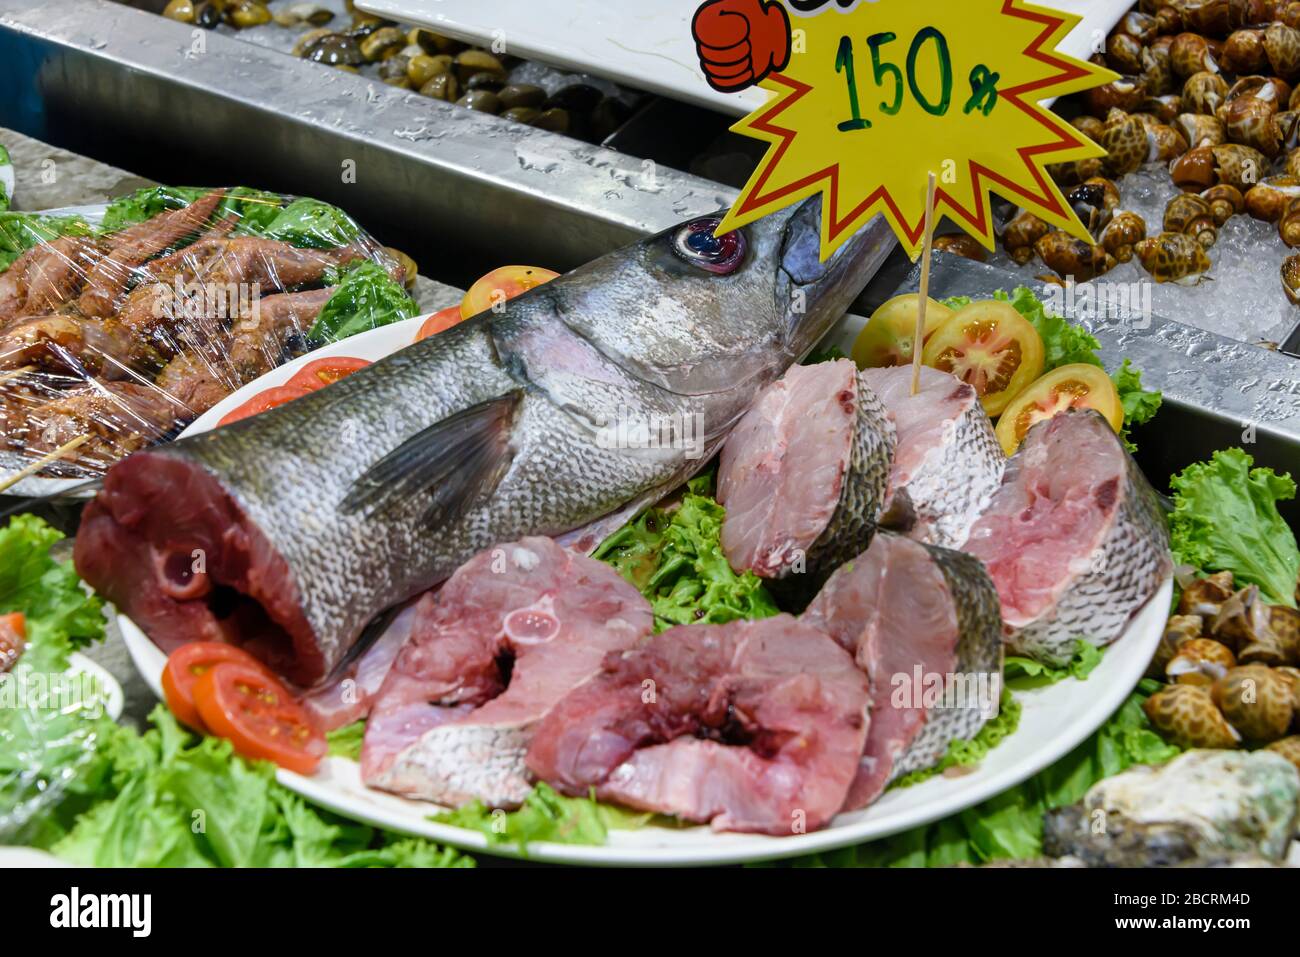 Barracuda fish cut into steaks on sale at a fishmonger wet market stall, Phuket, Thailand Stock Photo